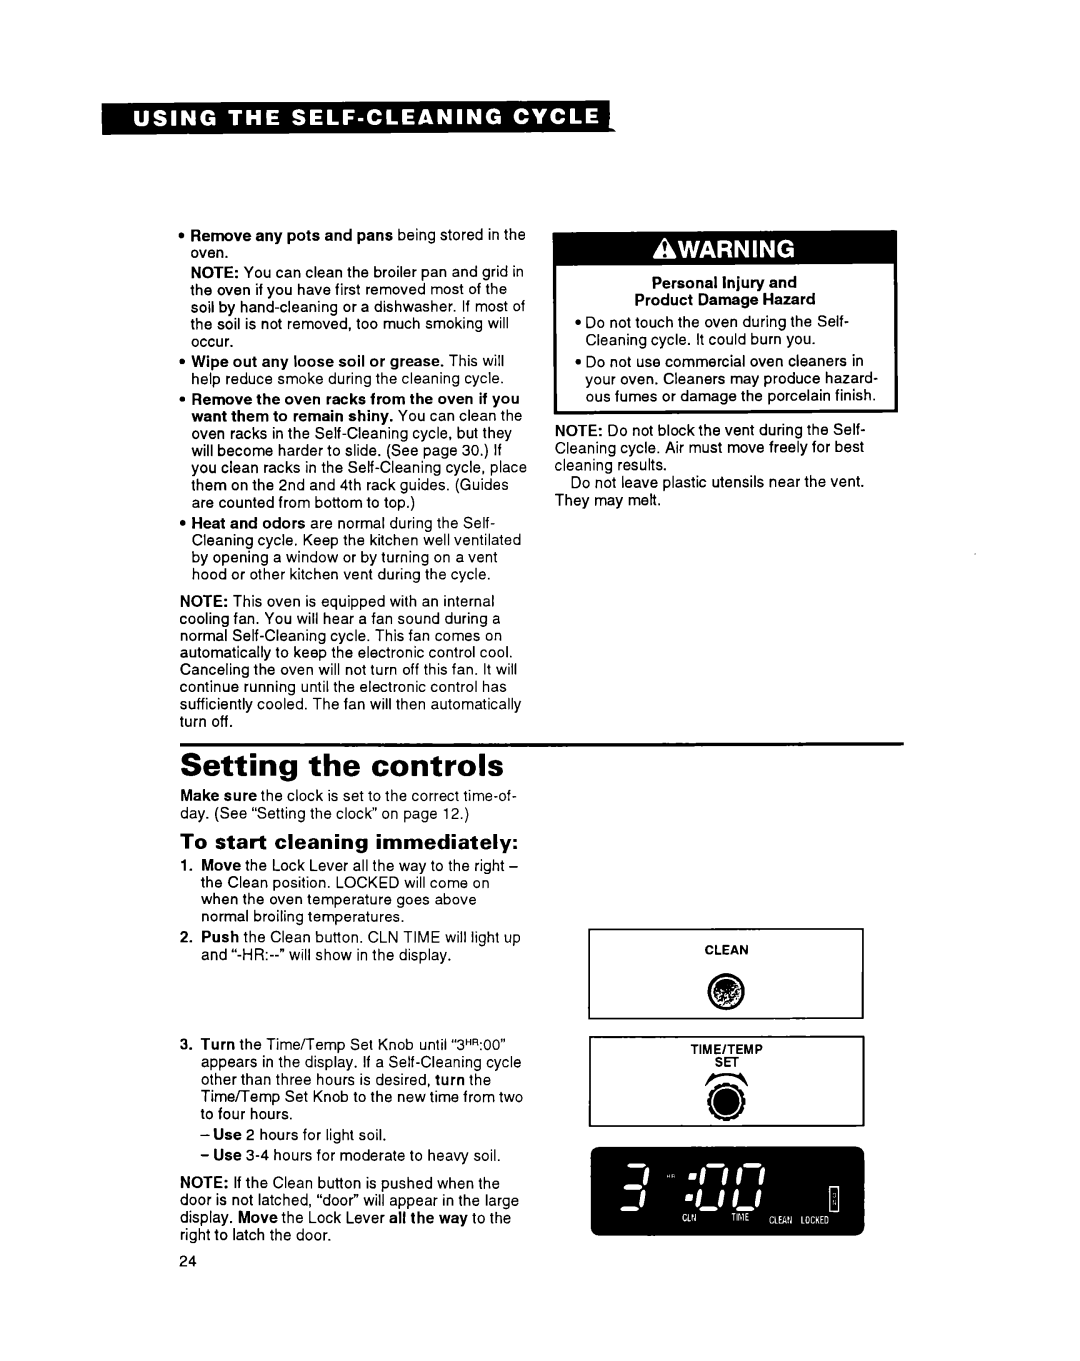 Whirlpool FGS395Y important safety instructions Setting the controls, To start cleaning immediately 